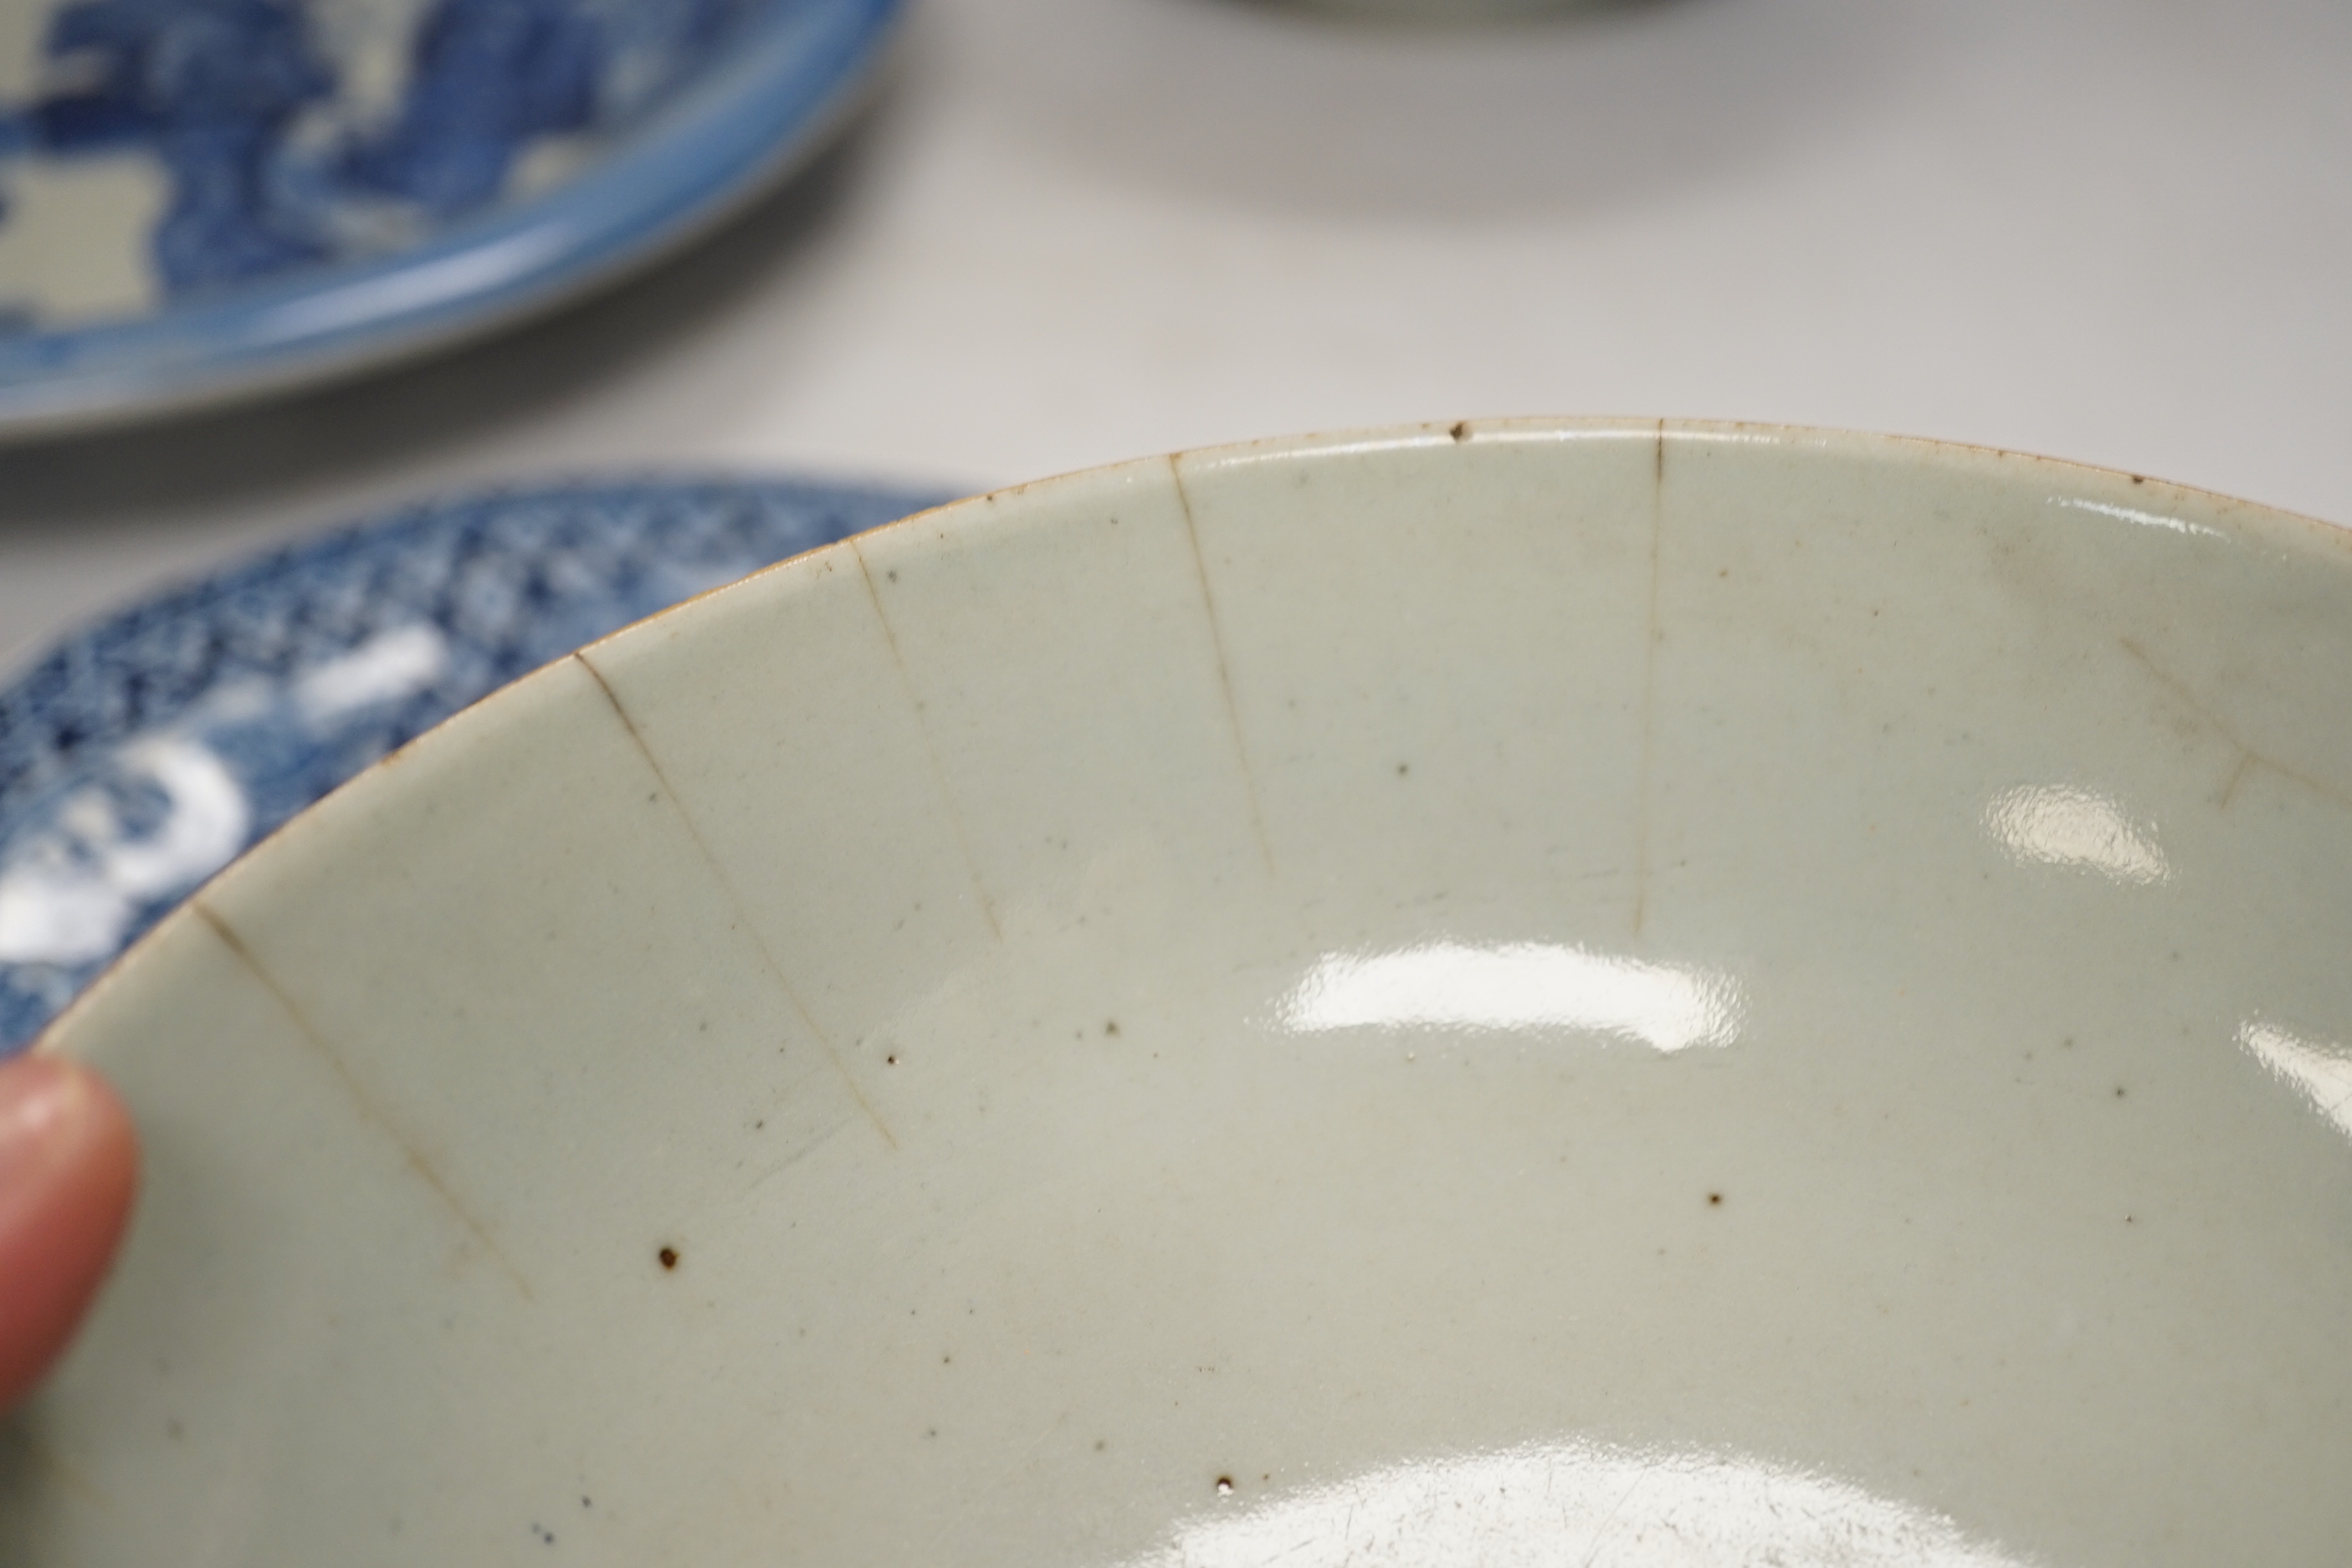 Assorted Chinese and Japanese ceramics comprising a famille rose bowl, two blue and white plates and a blue and white bowl, largest 30cm in diameter